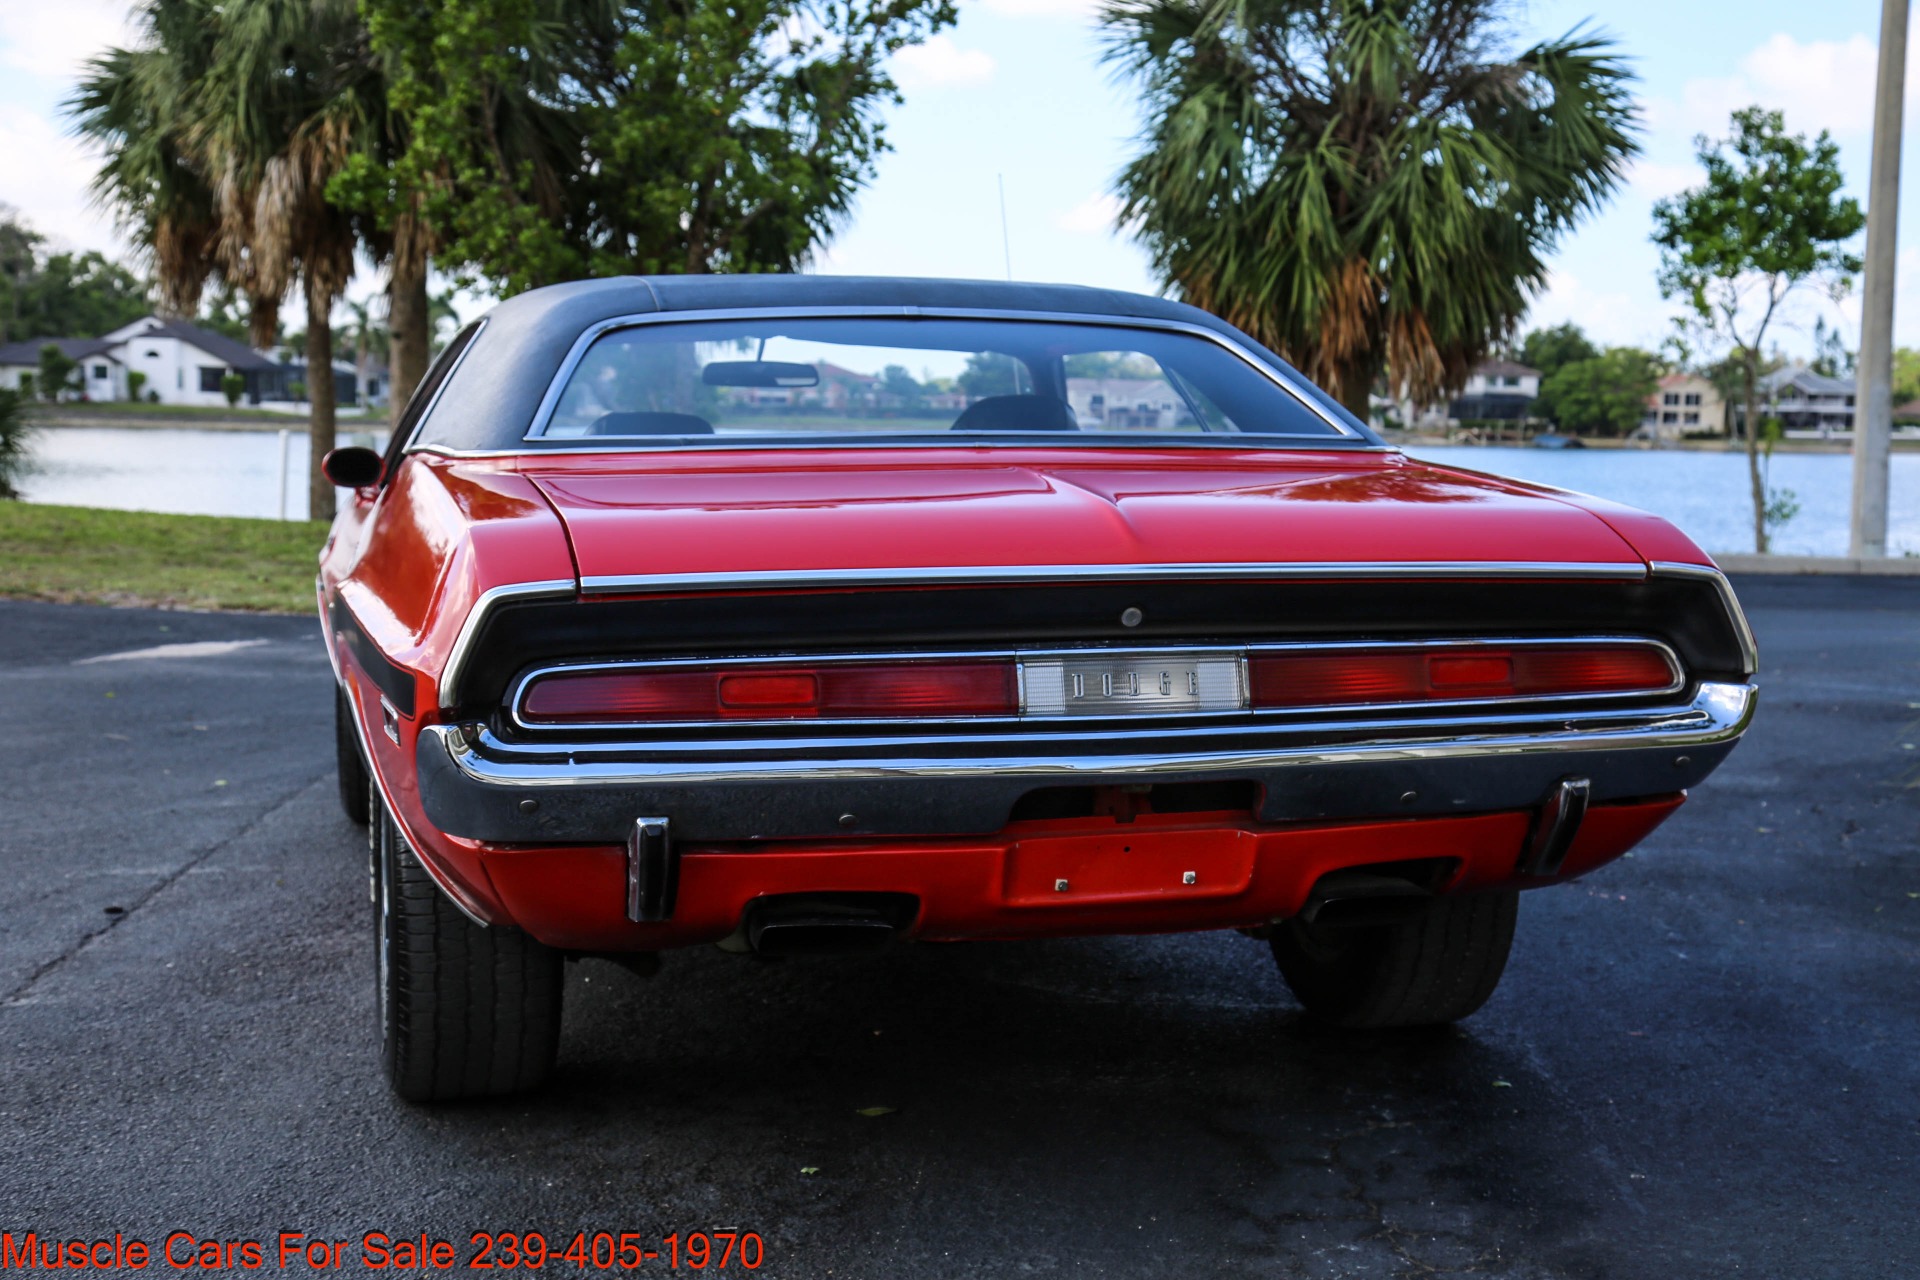 Used 1970 Dodge Challenger 440 Automatic for sale $48,000 at Muscle Cars for Sale Inc. in Fort Myers FL 33912 7